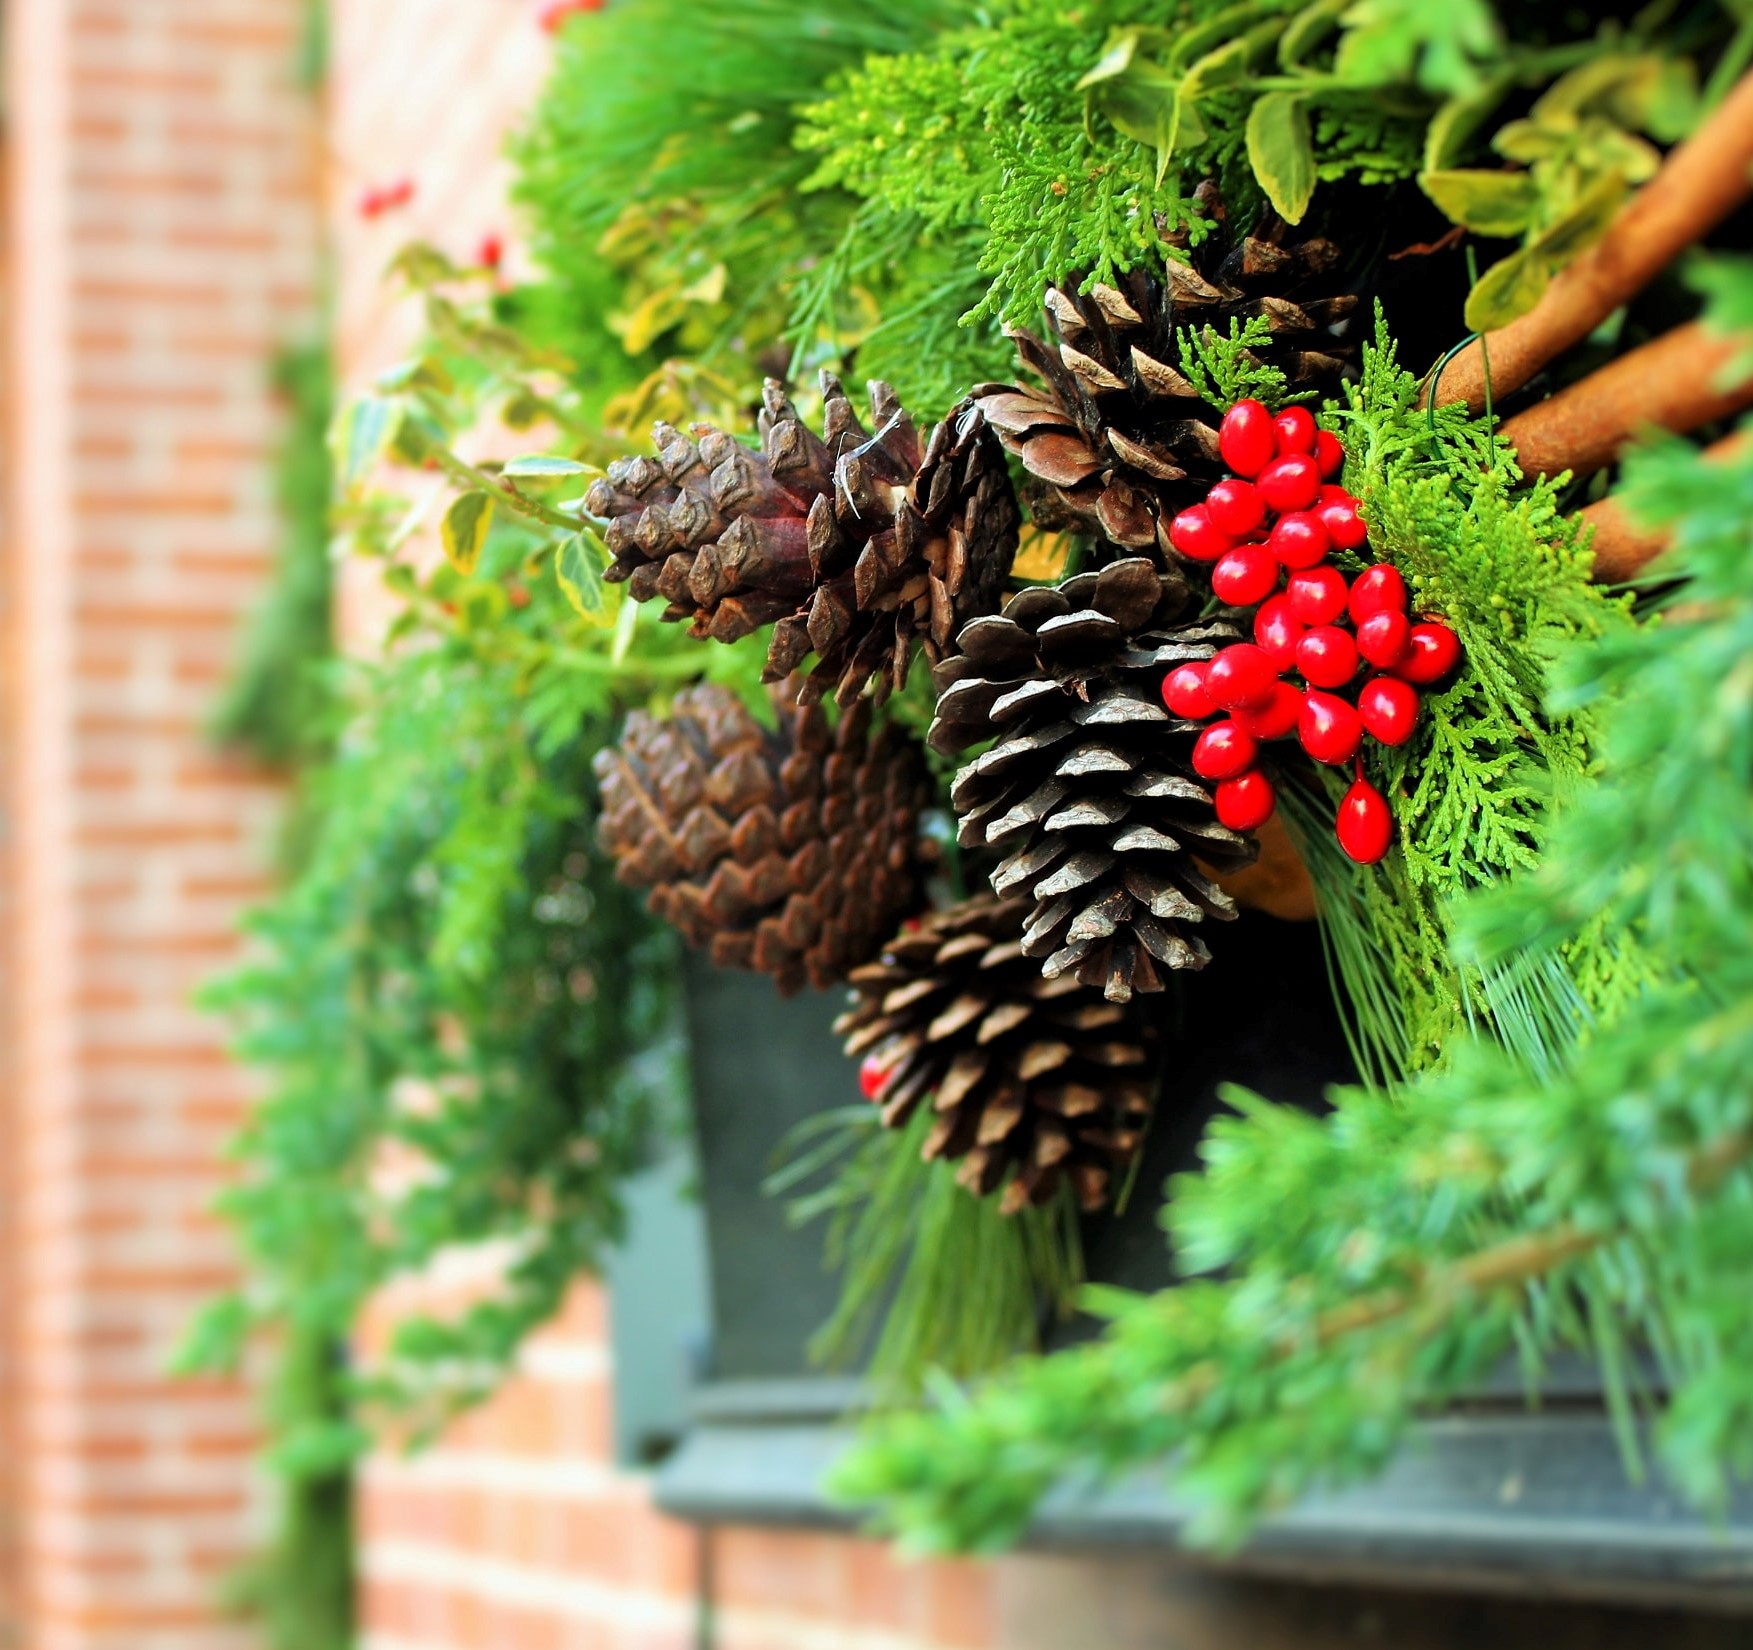 A holiday planter on the outside of a building